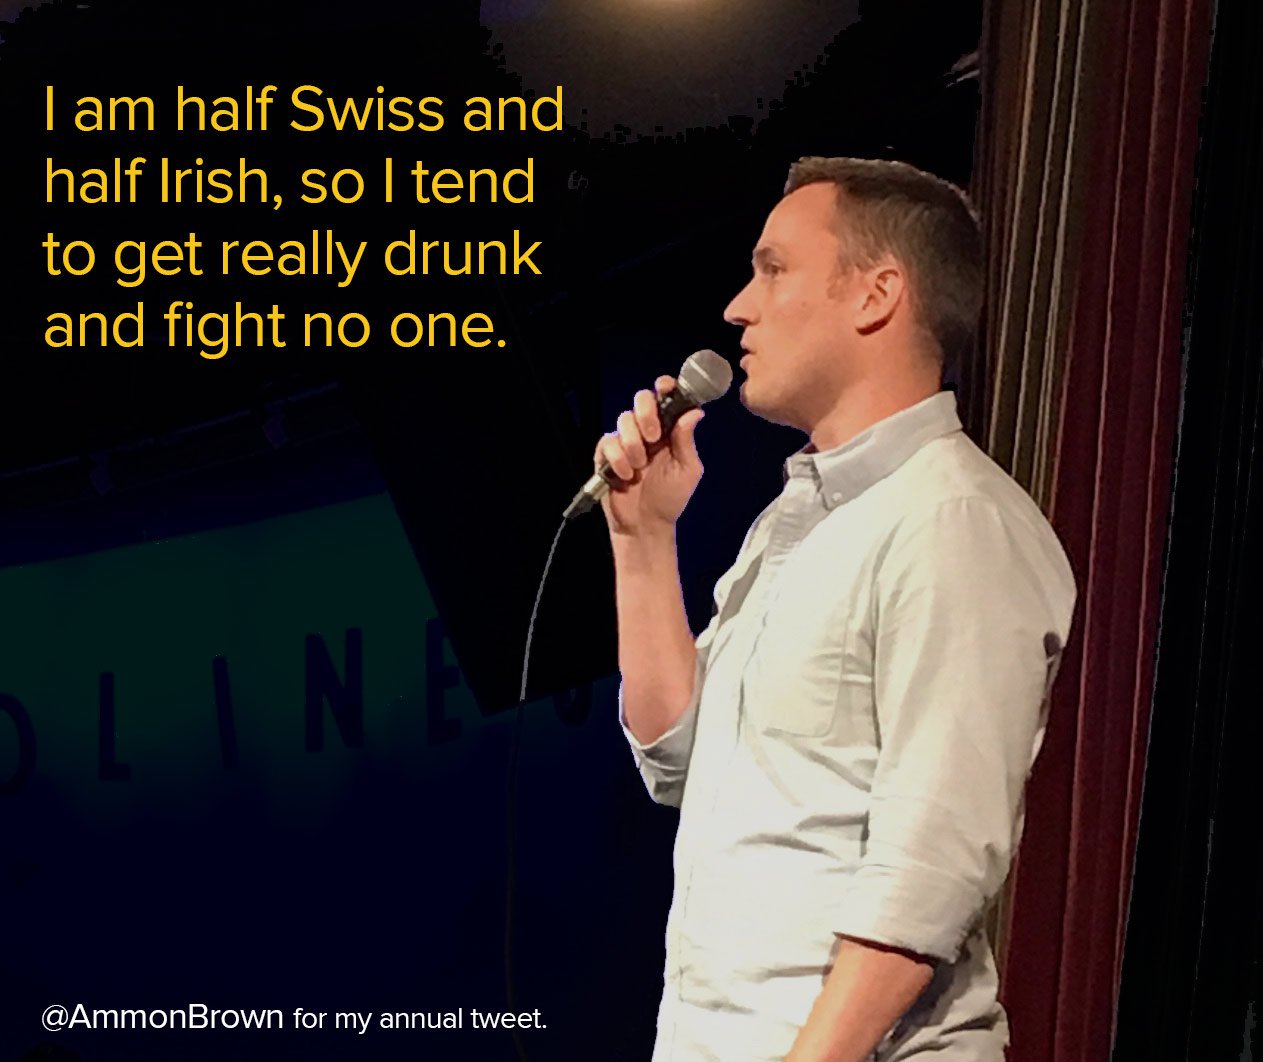 wife date meme - Tam half Swiss and half Irish, so tend to get really drunk and fight no one. for my annual tweet.